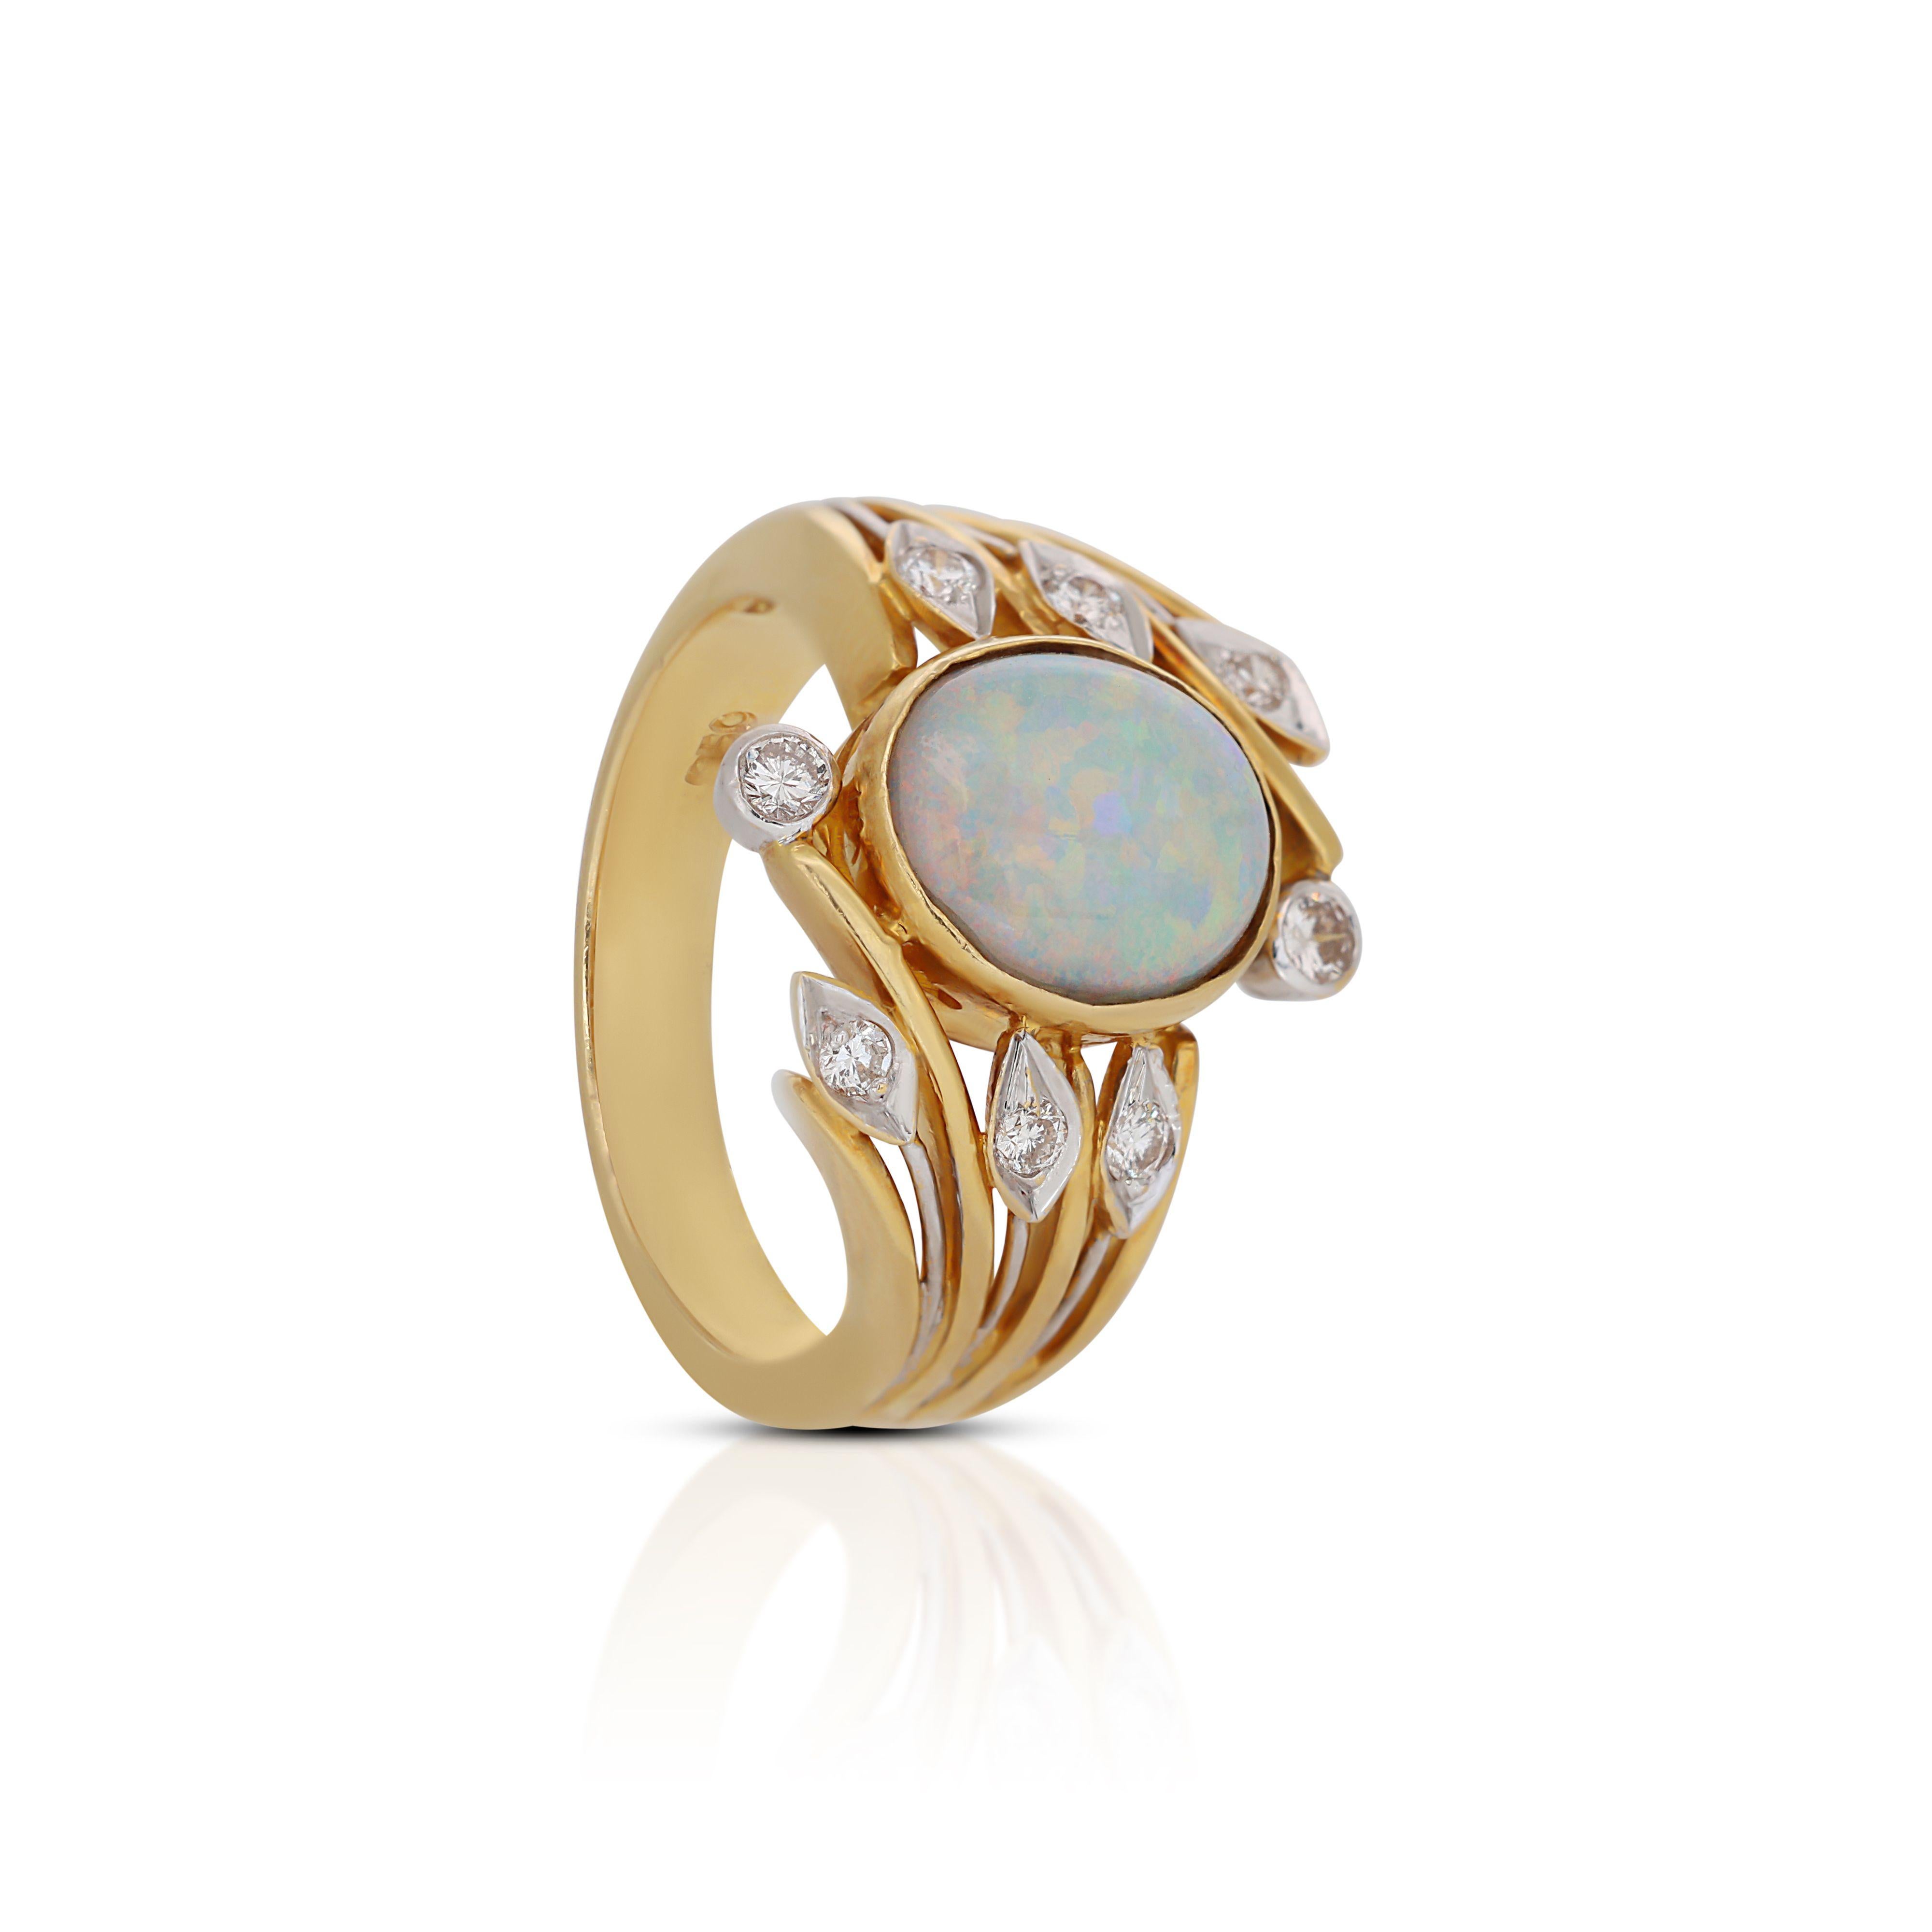  Elegant 20K Yellow Gold Opal Diamond Ring w/ 0.12 ct Natural Diamonds NGI Cert In New Condition For Sale In רמת גן, IL